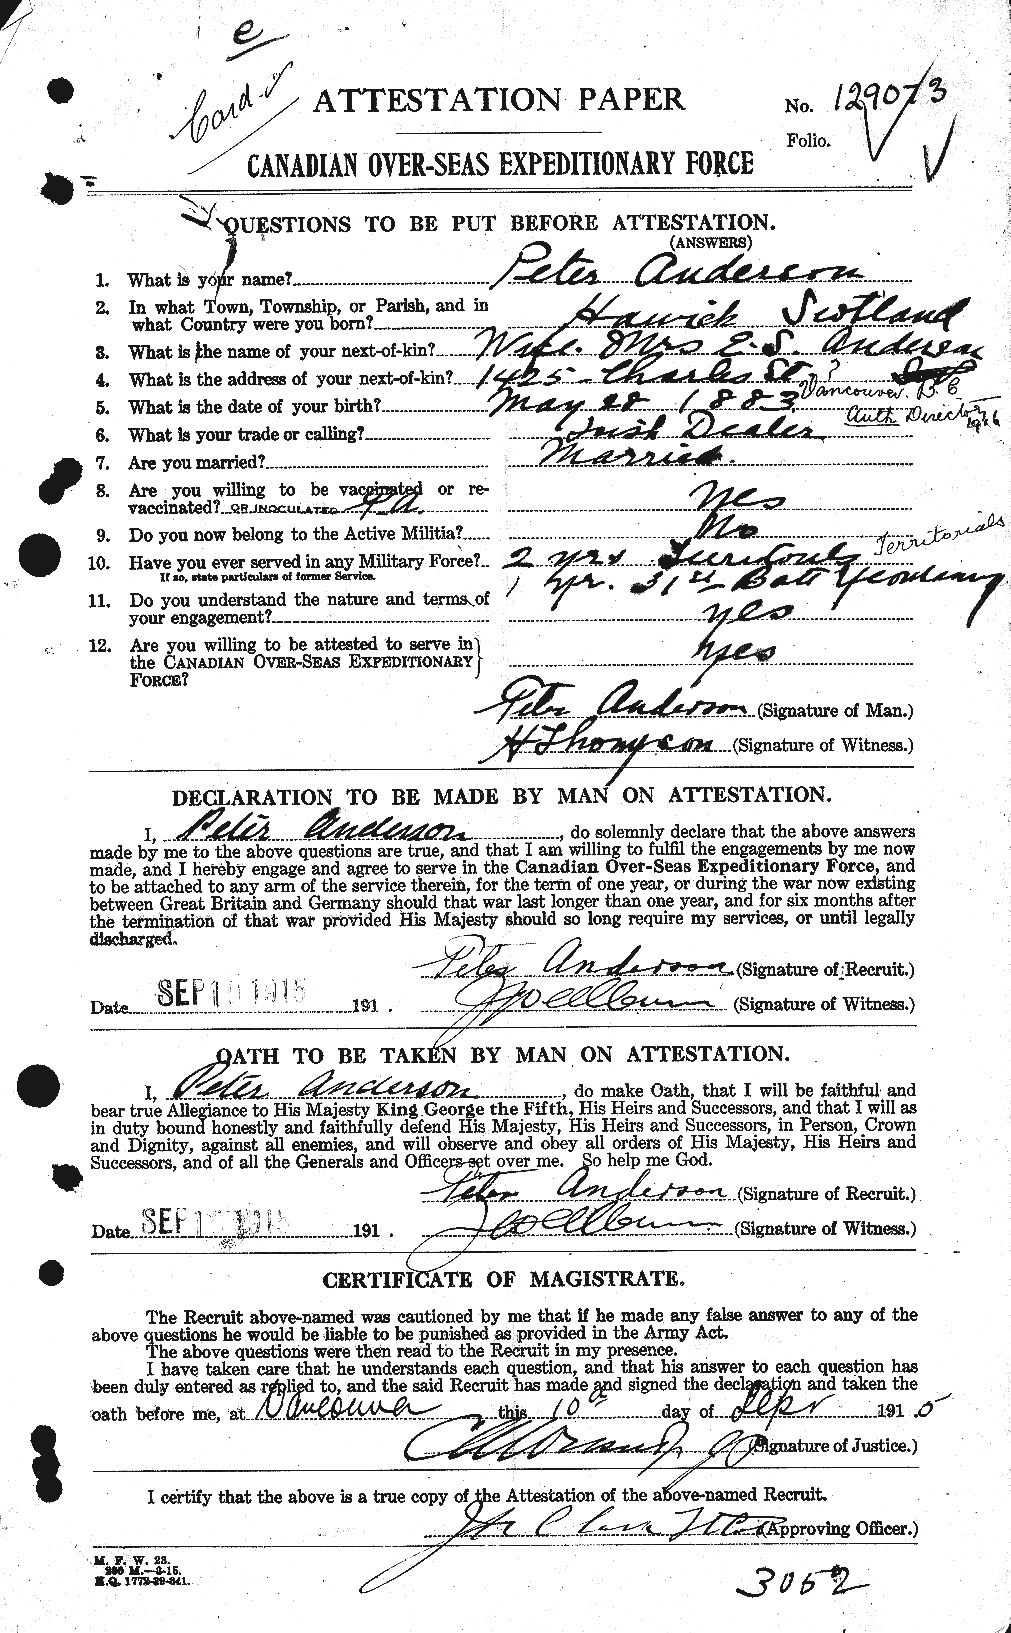 Personnel Records of the First World War - CEF 207356a